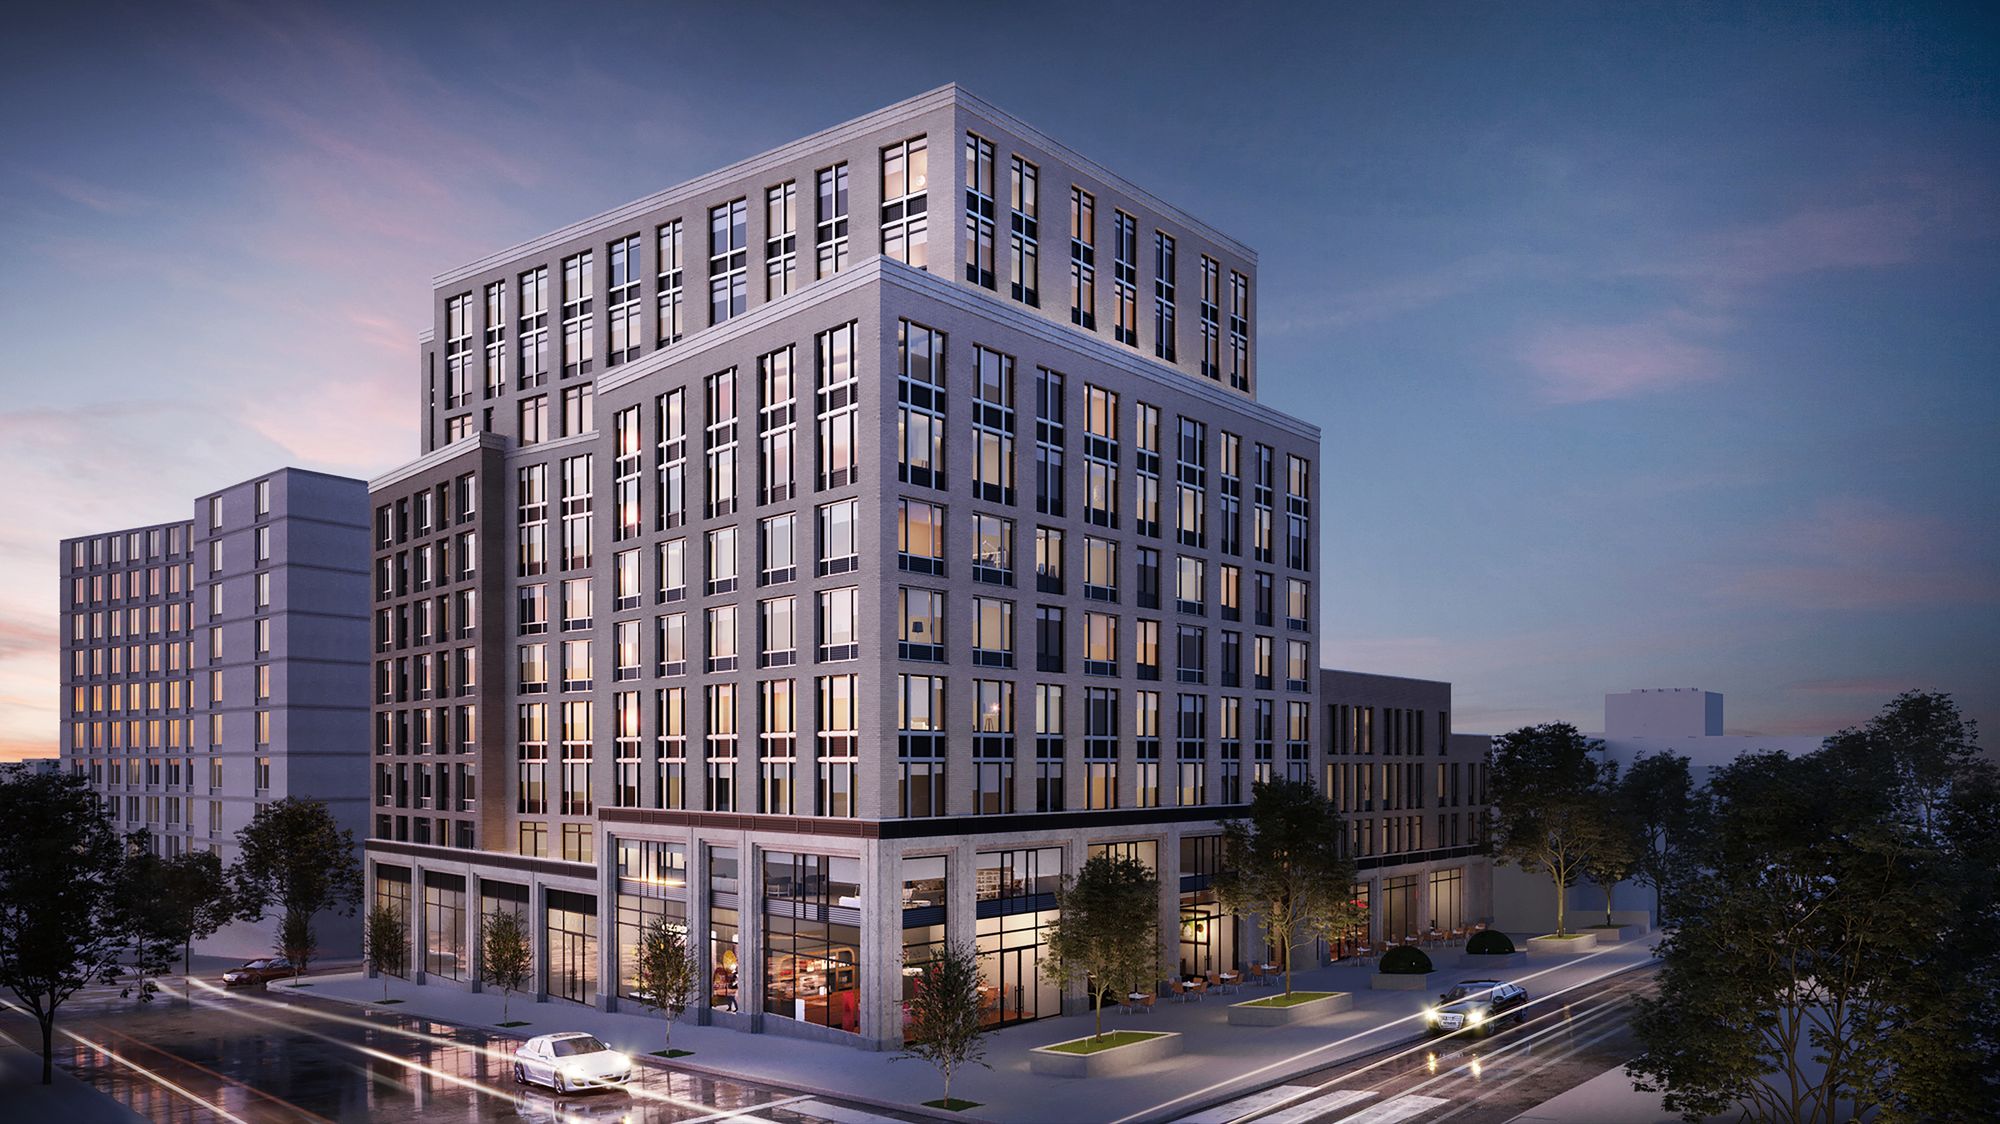 409 Eastern Parkway Almost Complete, Bringing More Luxury Apartments To Crown Heights